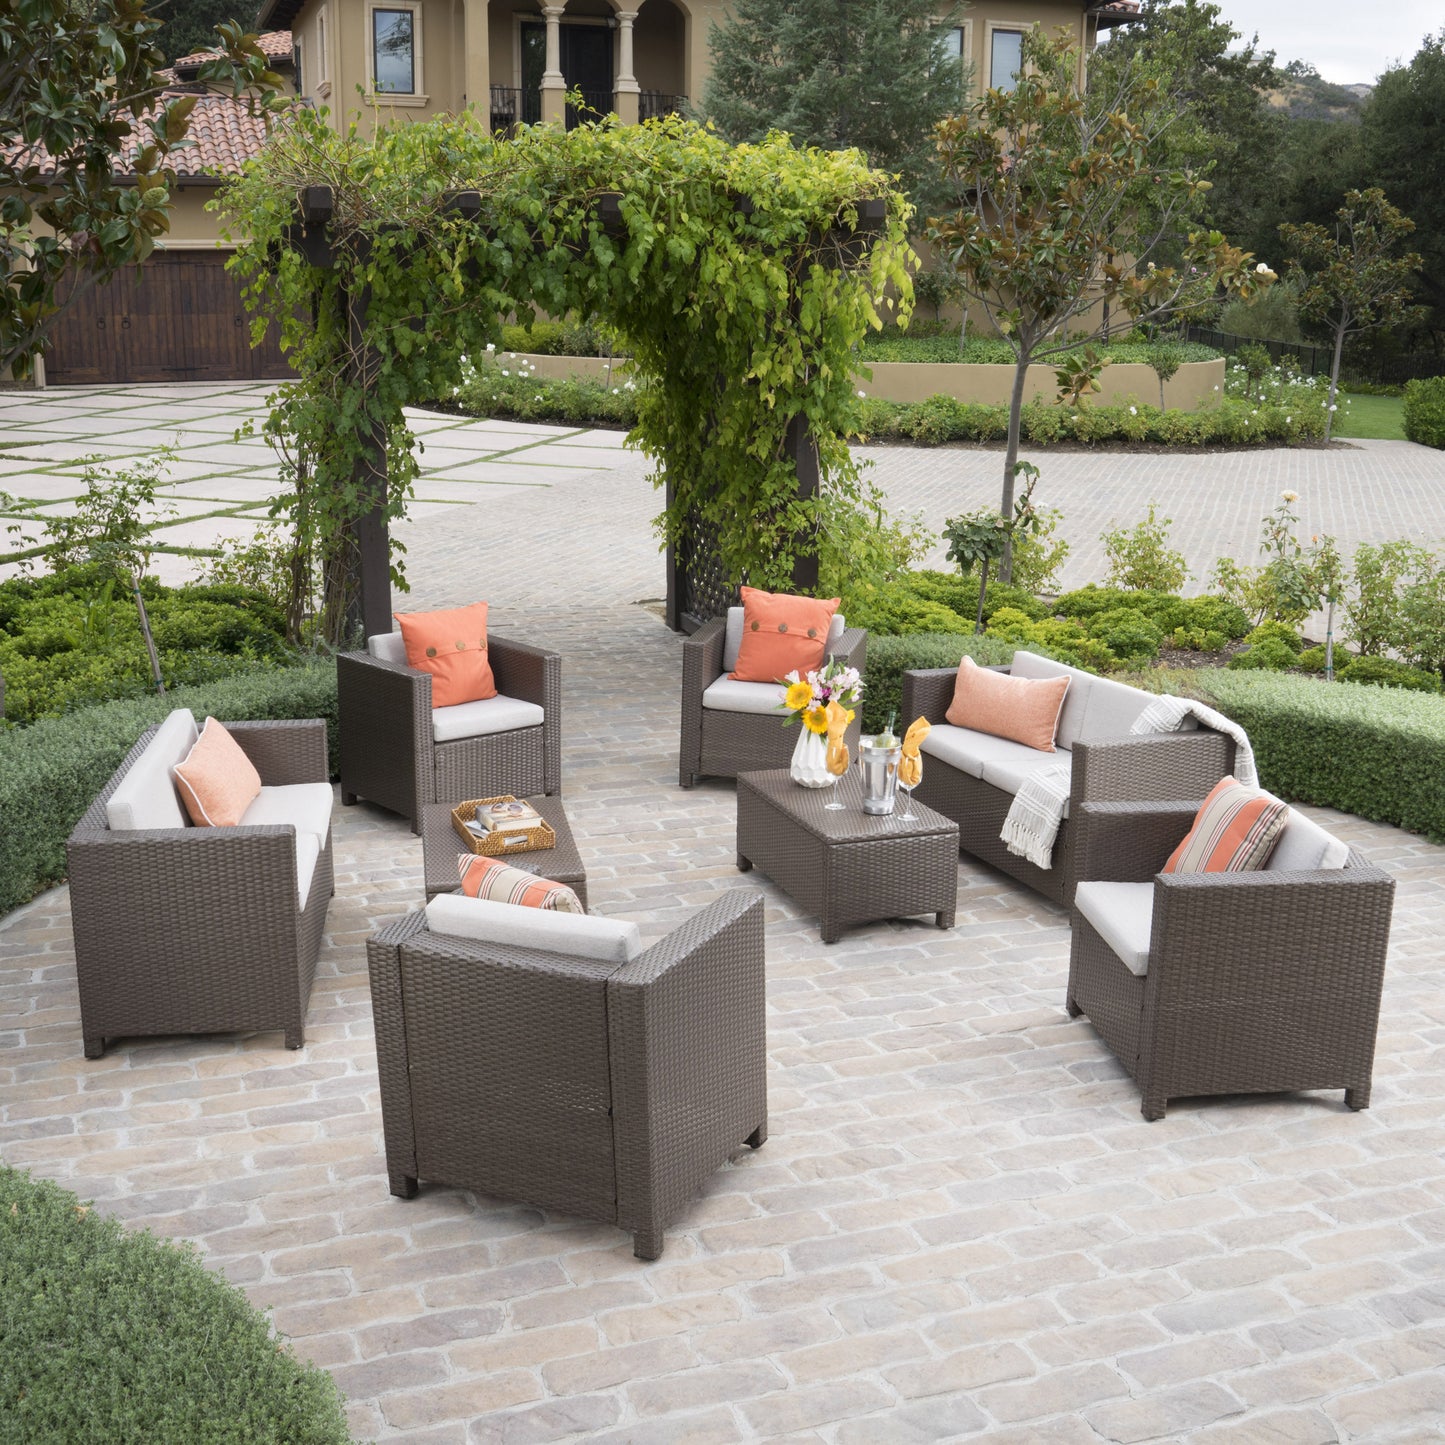 Feronia Outdoor 8 Pc Wicker Chat Set w/ Water Resistant Cushions